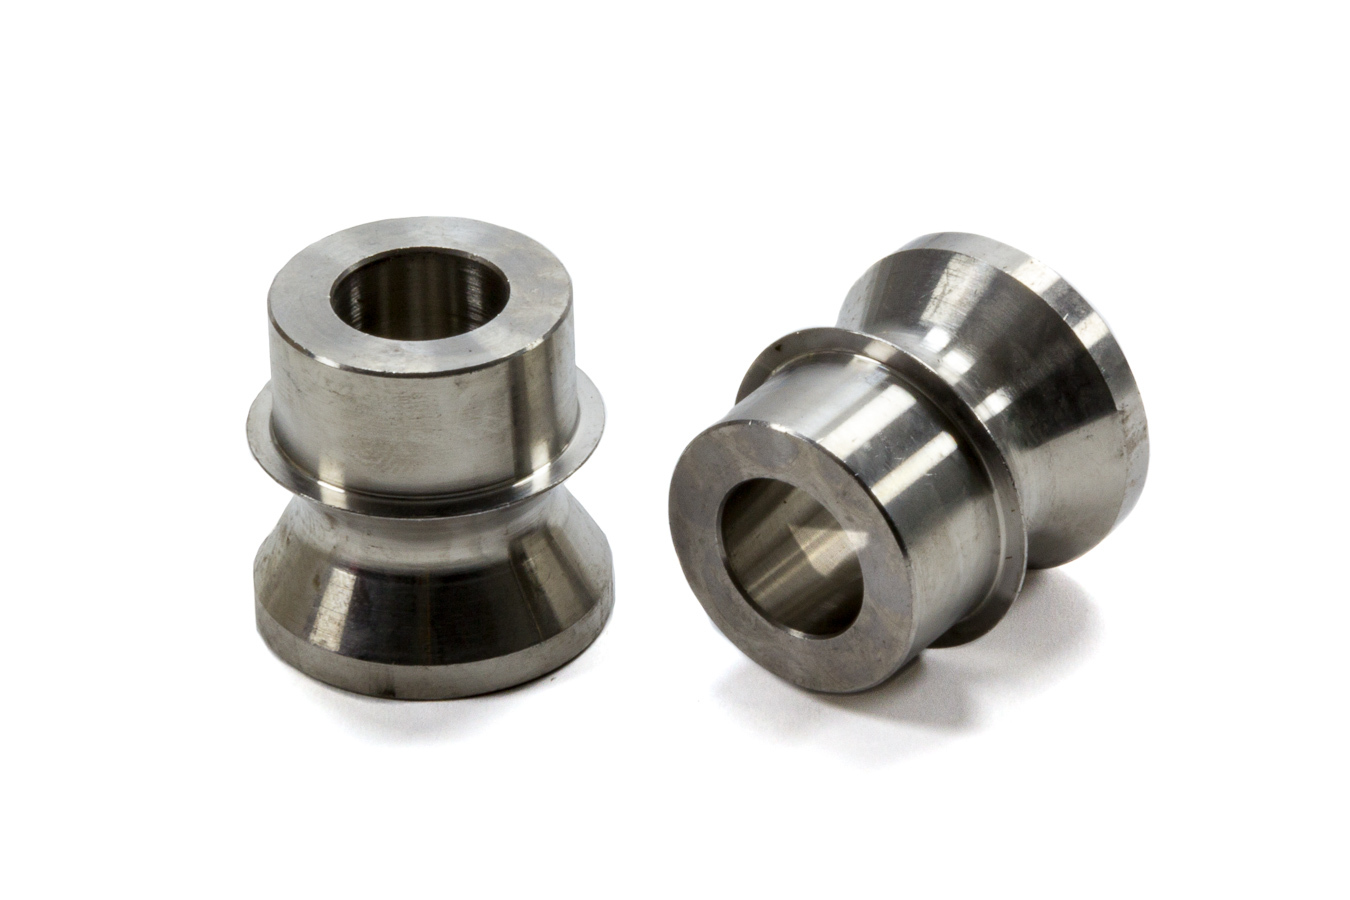 FK Rod Ends 12-8HB Rod End Bushing, 3/4 to 1/2 in Bore, High Misalignment, Steel, Natural, Pair